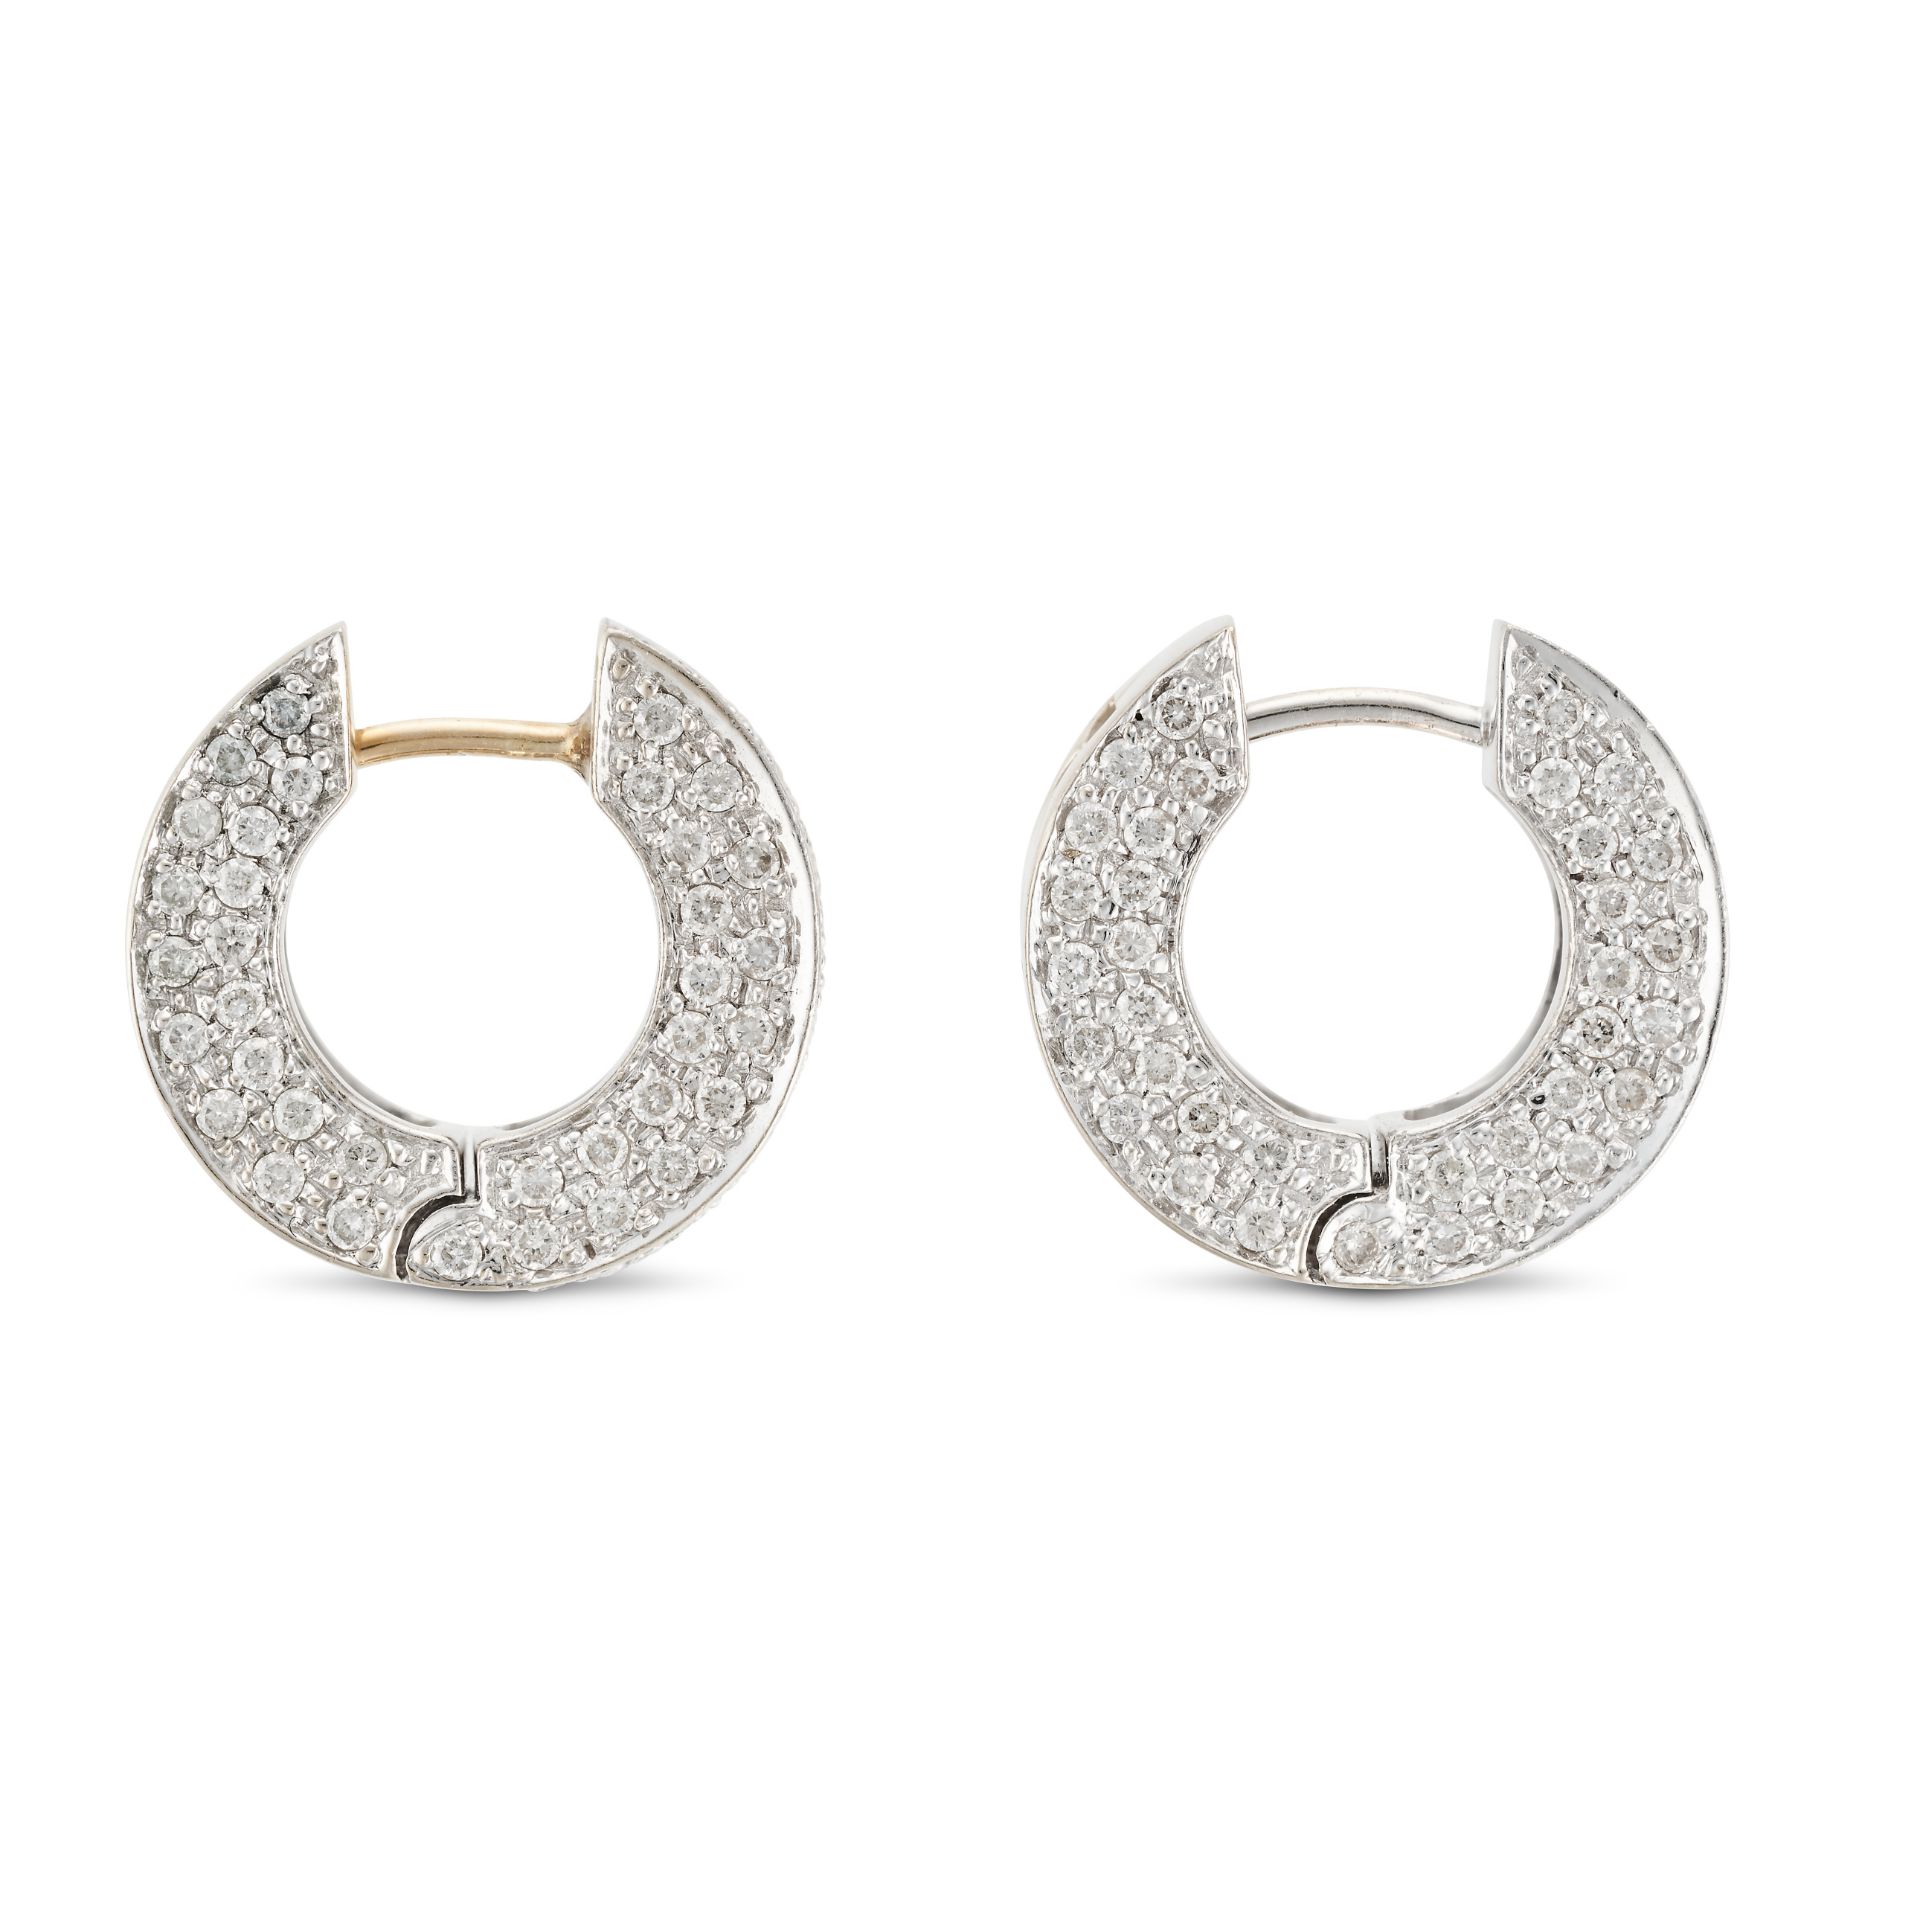 A PAIR OF DIAMOND HUGGIE HOOP EARRINGS each hoop pave set to the front and sides with round brill... - Image 3 of 3